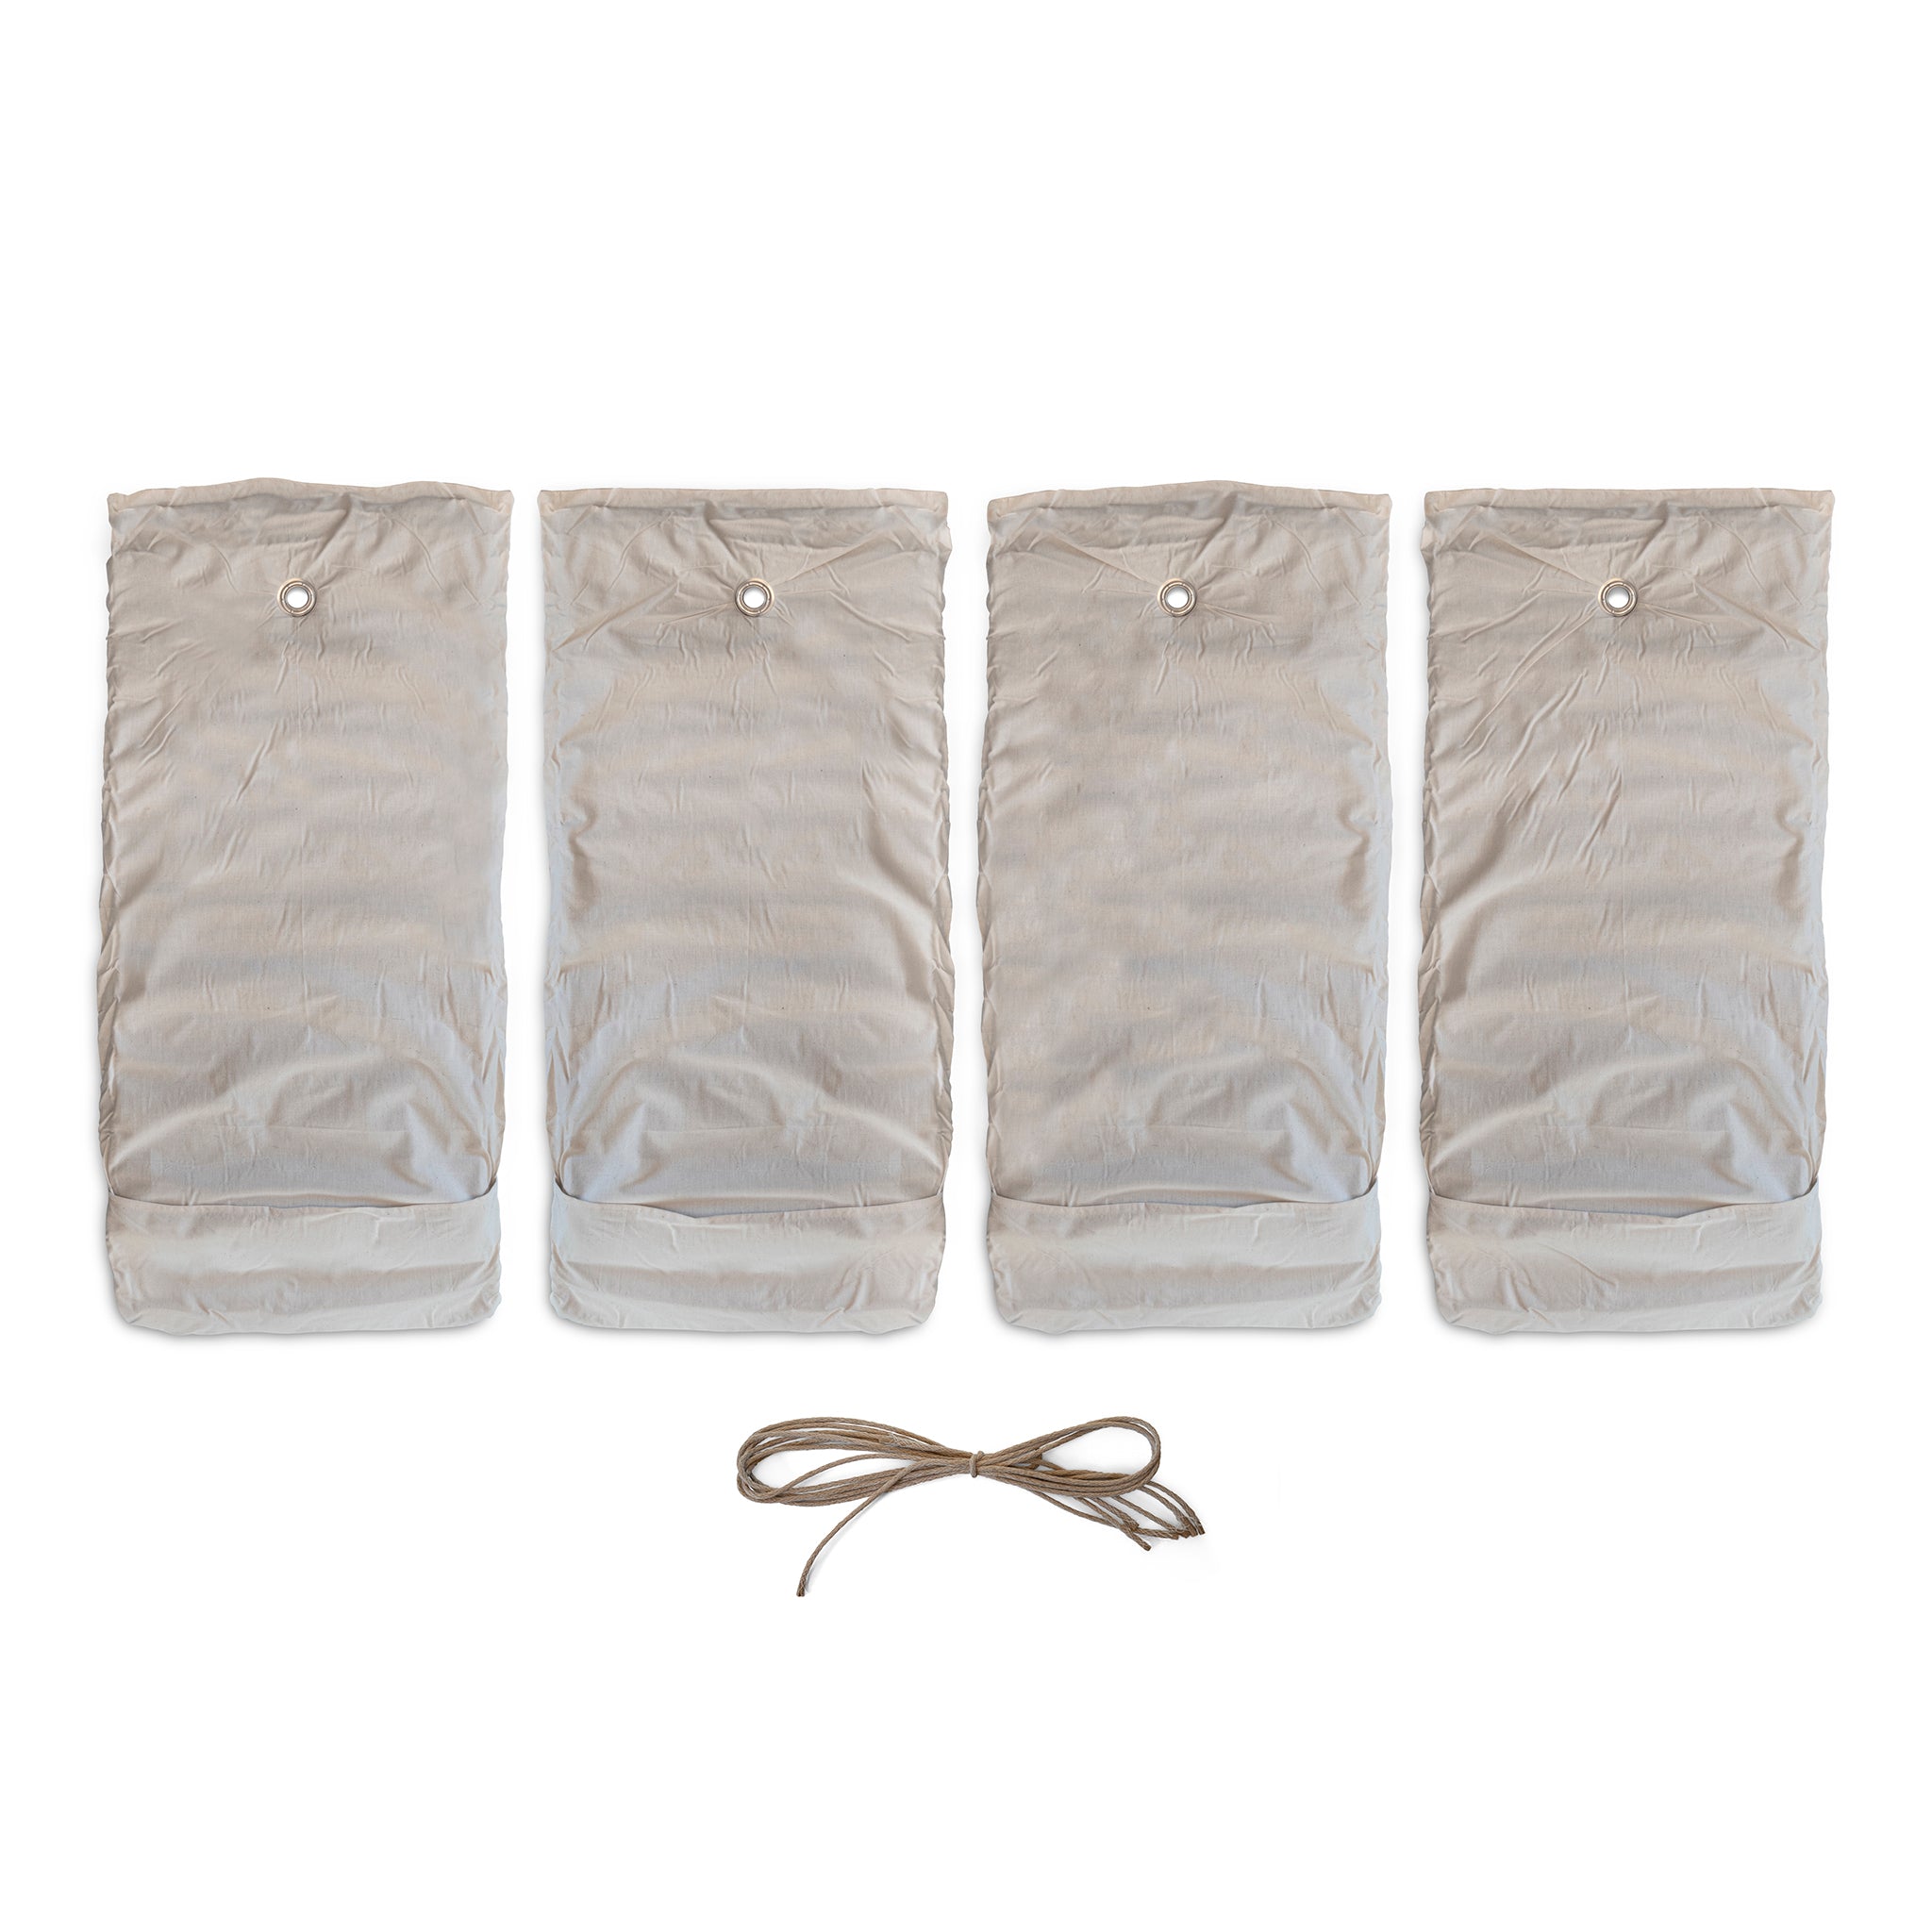 All four panels of a sheep wool insulation jacket, laid out on a white background